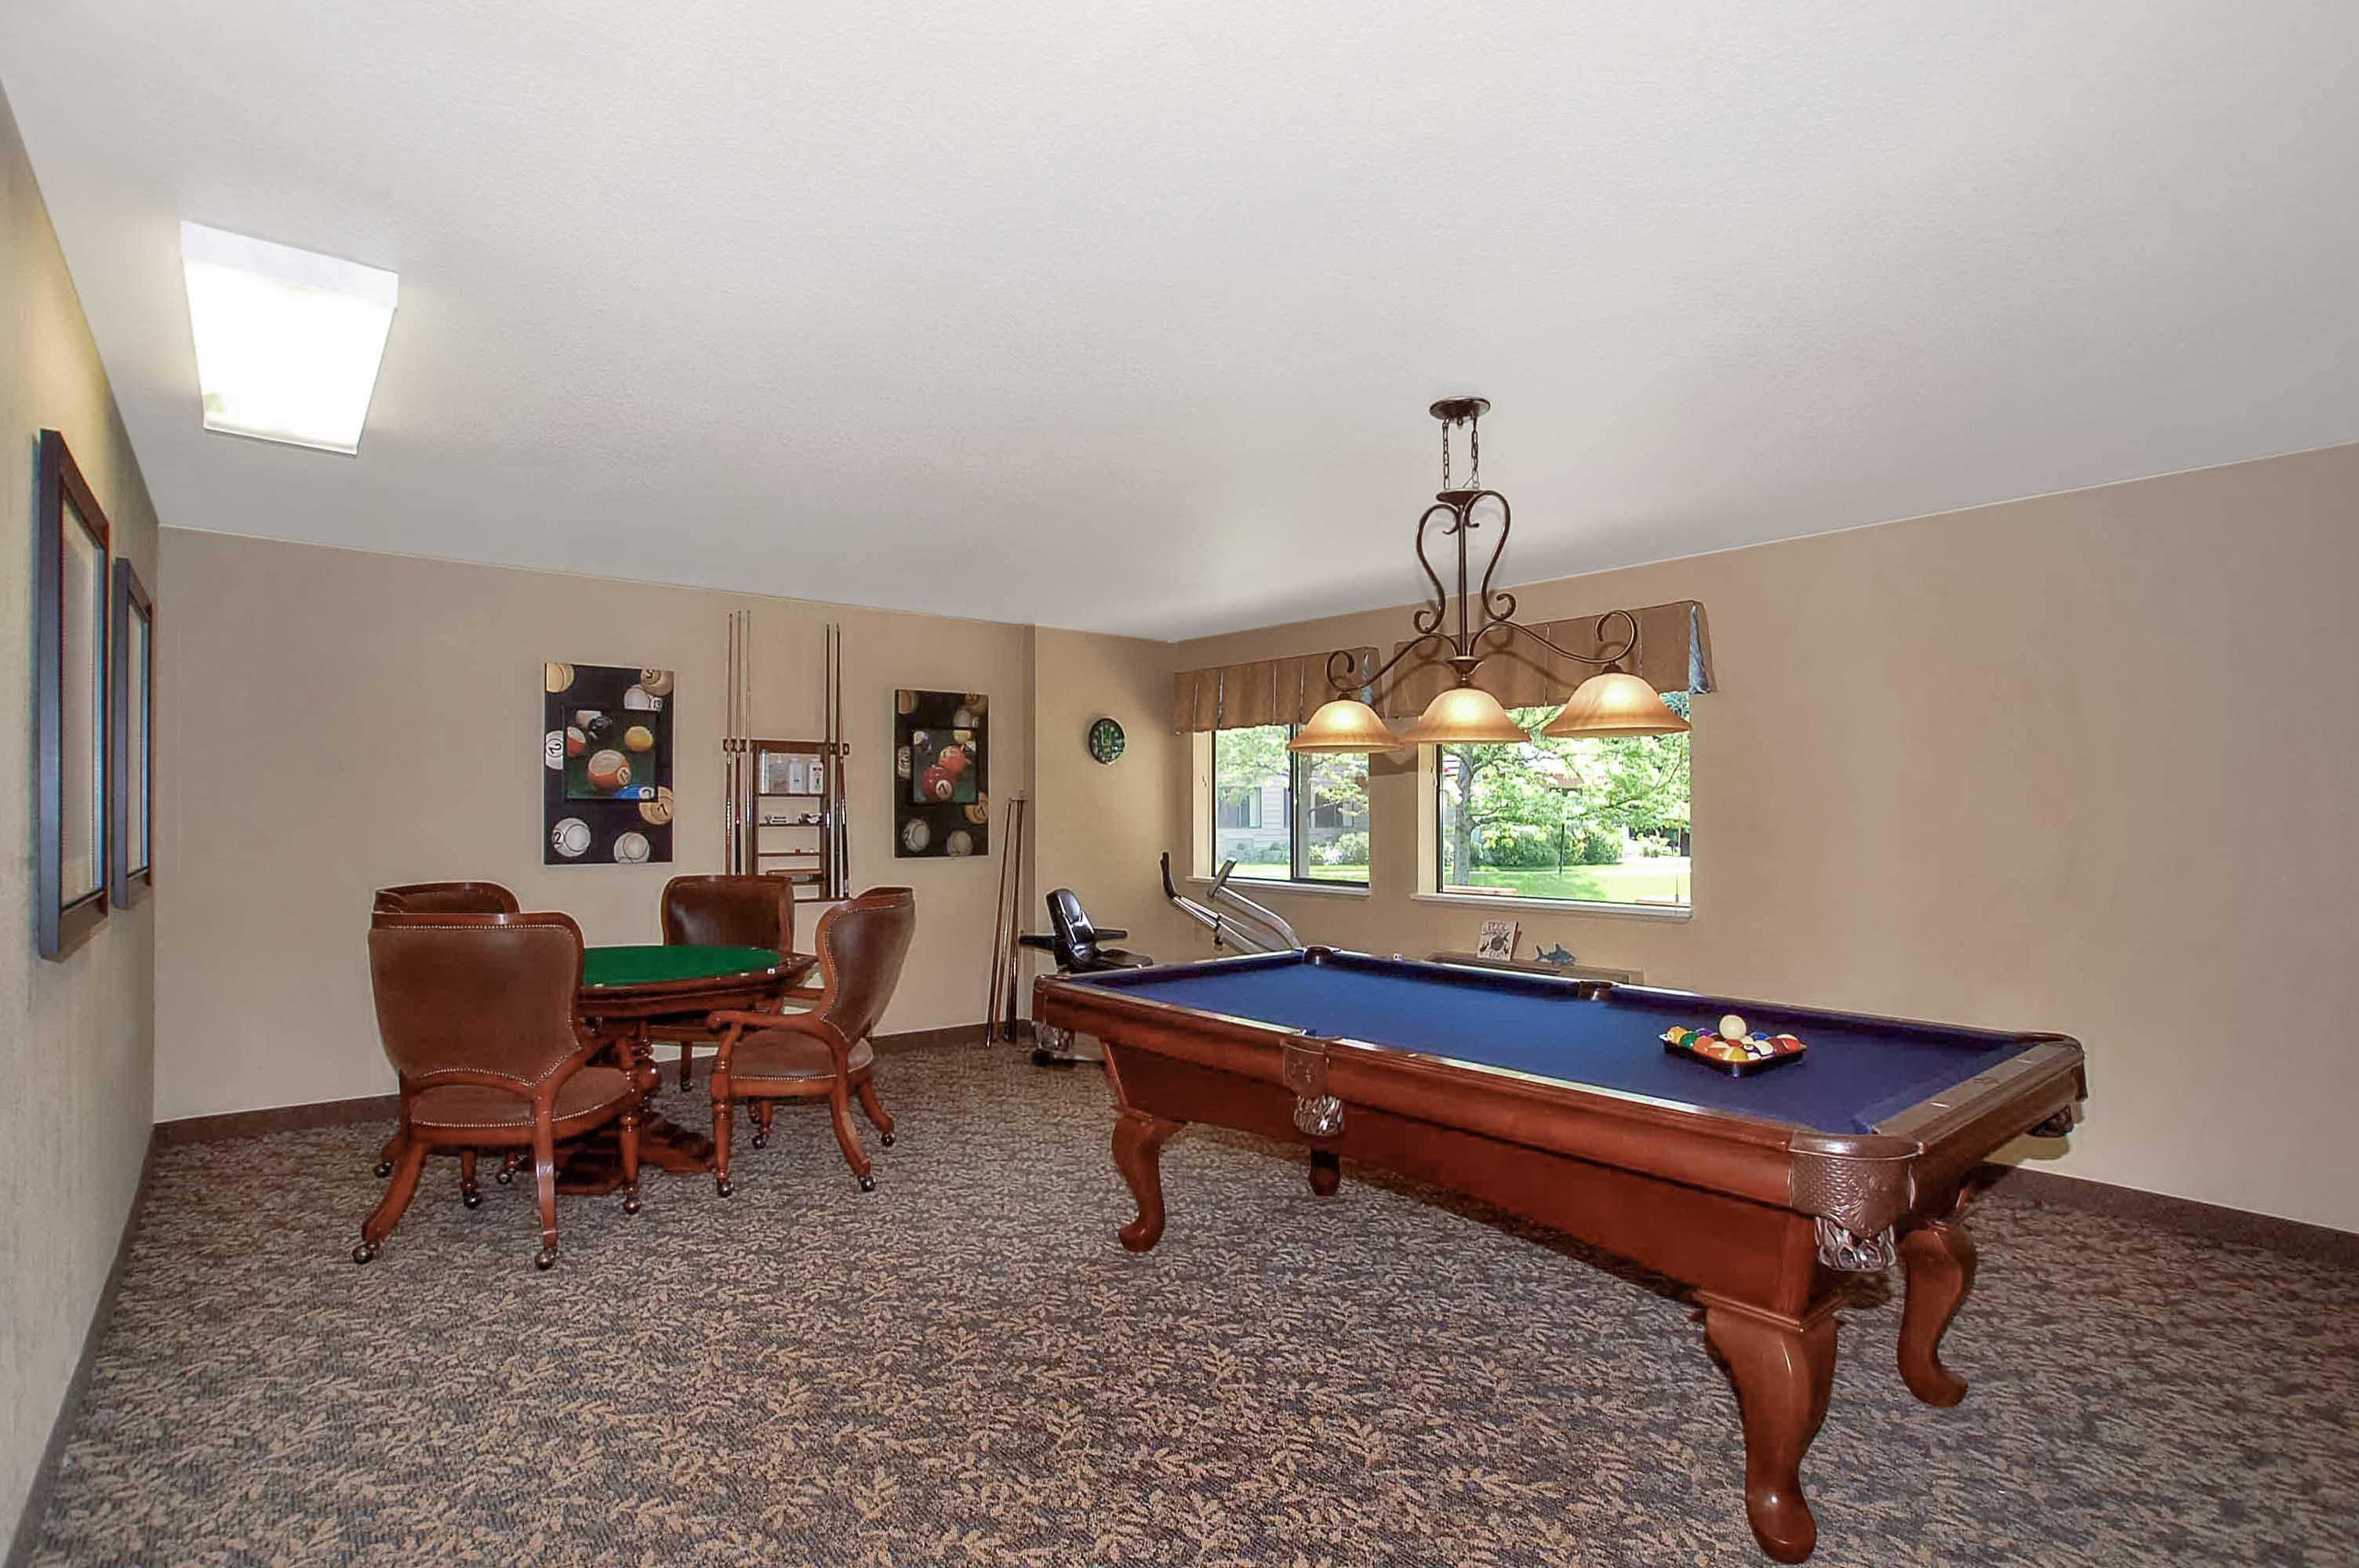 Senior living community billiard room at Parkwood Estates with furniture, pool table, and cricket sport gear.